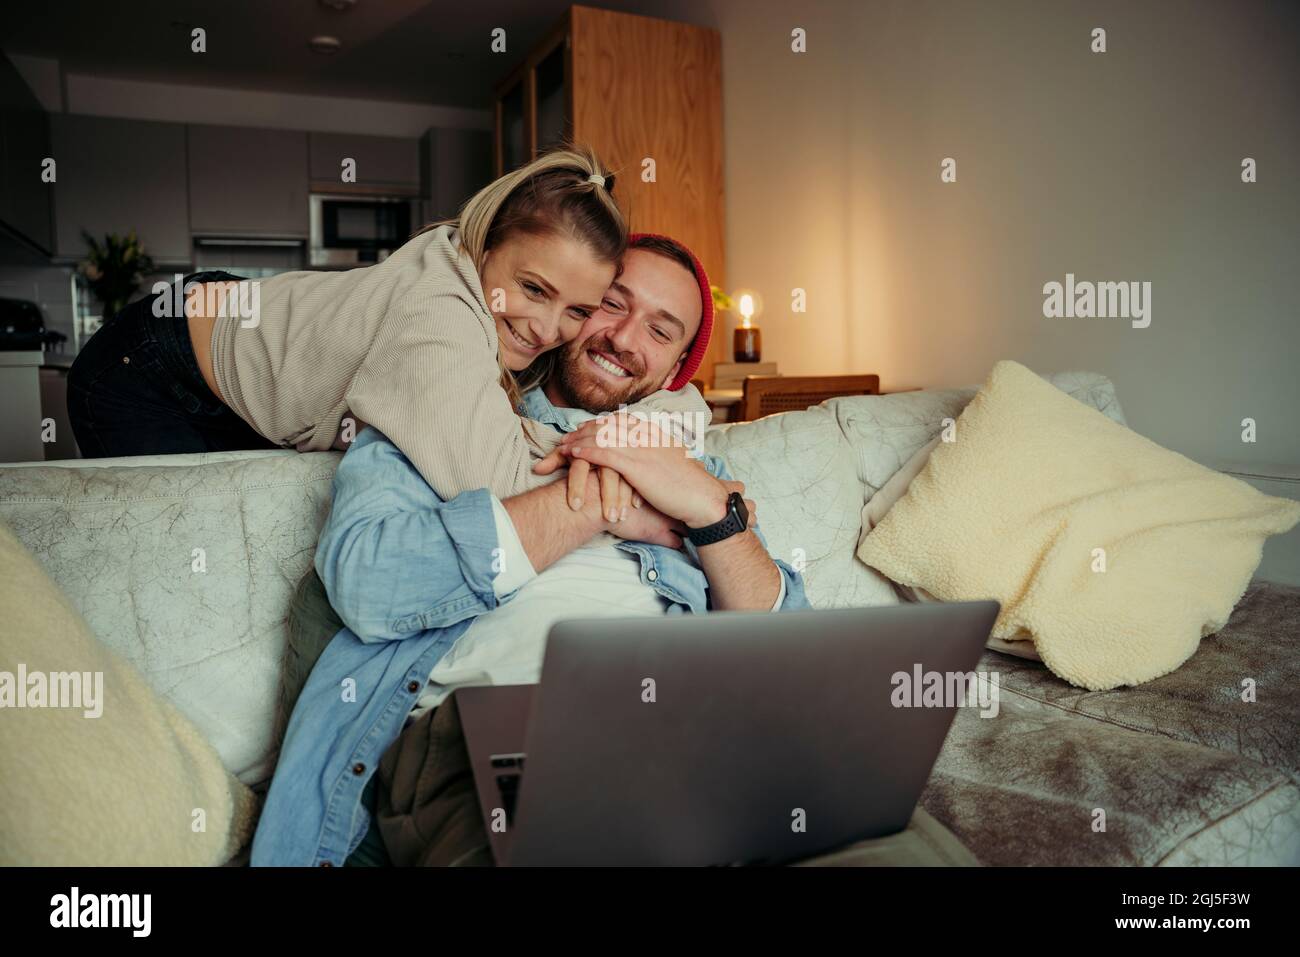 Caucasian happy couple sitting on couch showing love while hugging and cuddling while on video call using laptop Stock Photo